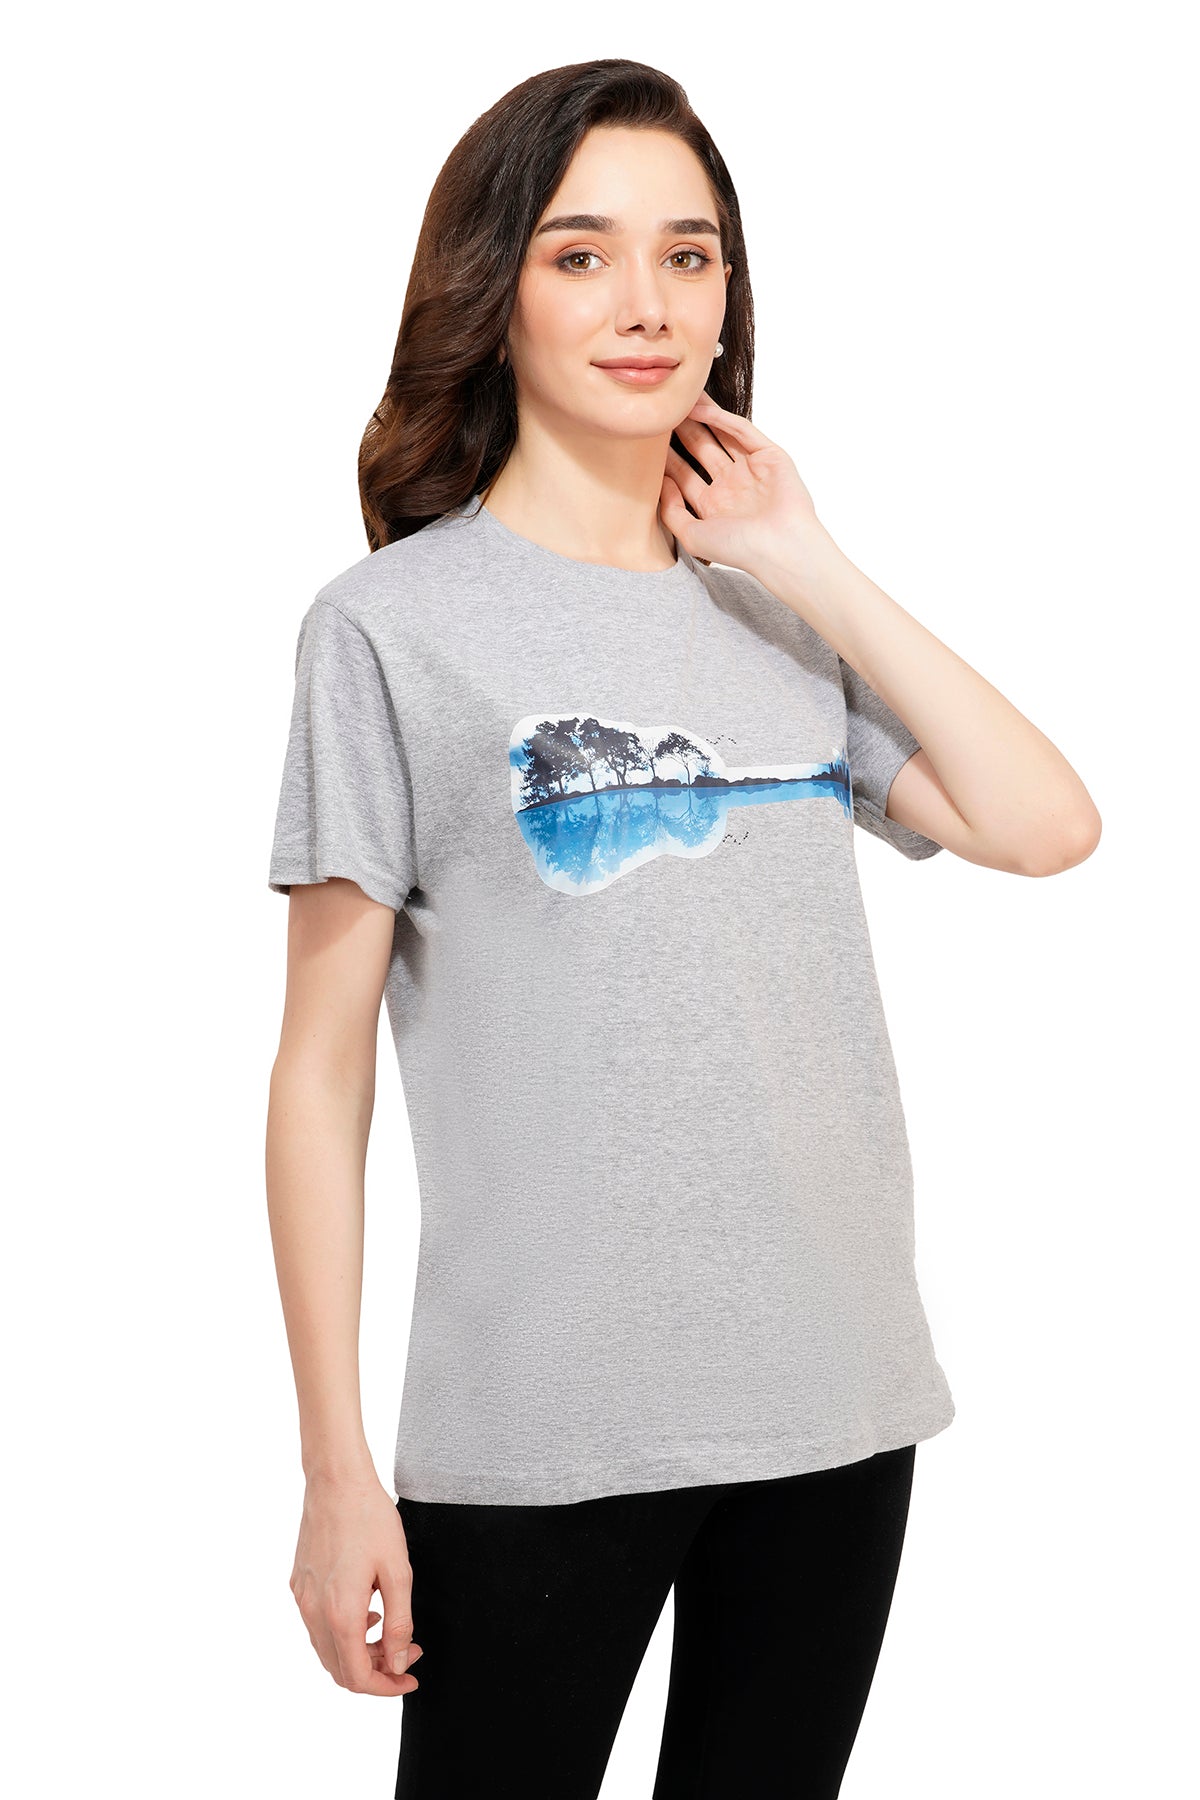 Women Heather Lake refection – Grey t-shirt SNAZZYNSUAVE Guitar